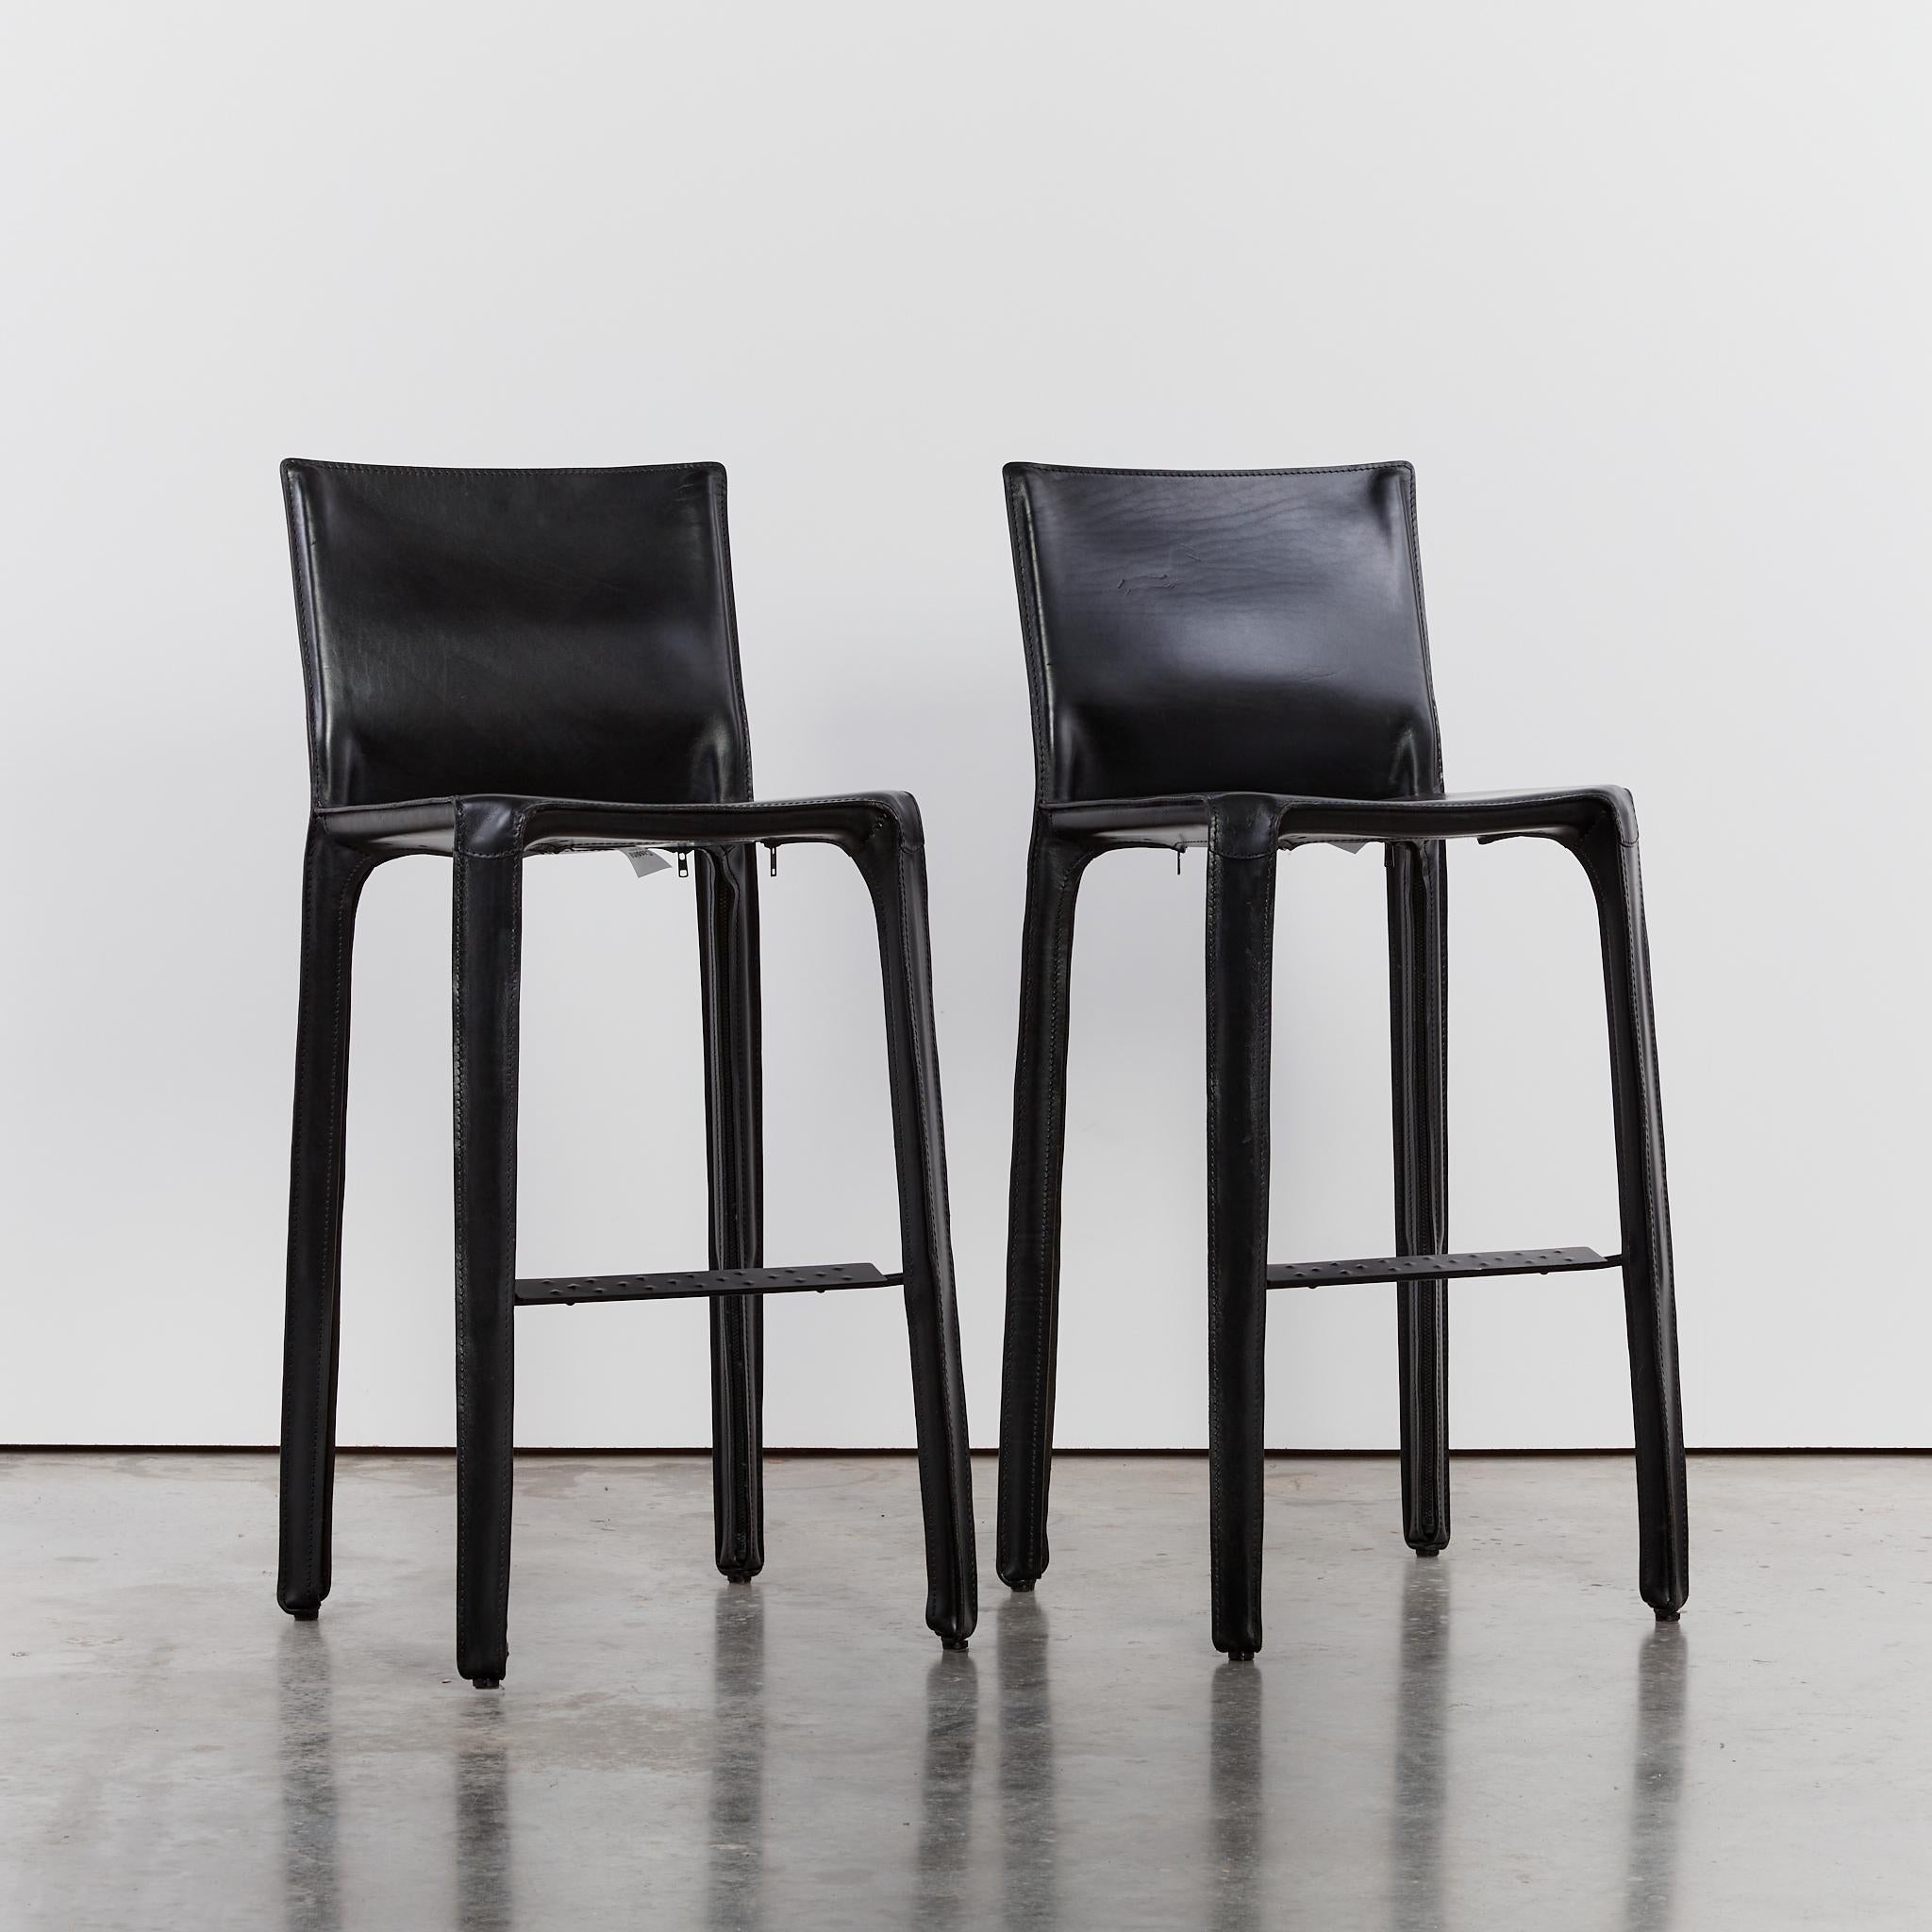 Mario Bellini CAB bar stools in black leather. Includes original labels and embossed logo on the base.

Made with a lengthy thinning process of the leather, the cut parts are stitched together, while the upholstery is hand-fitted to the steel